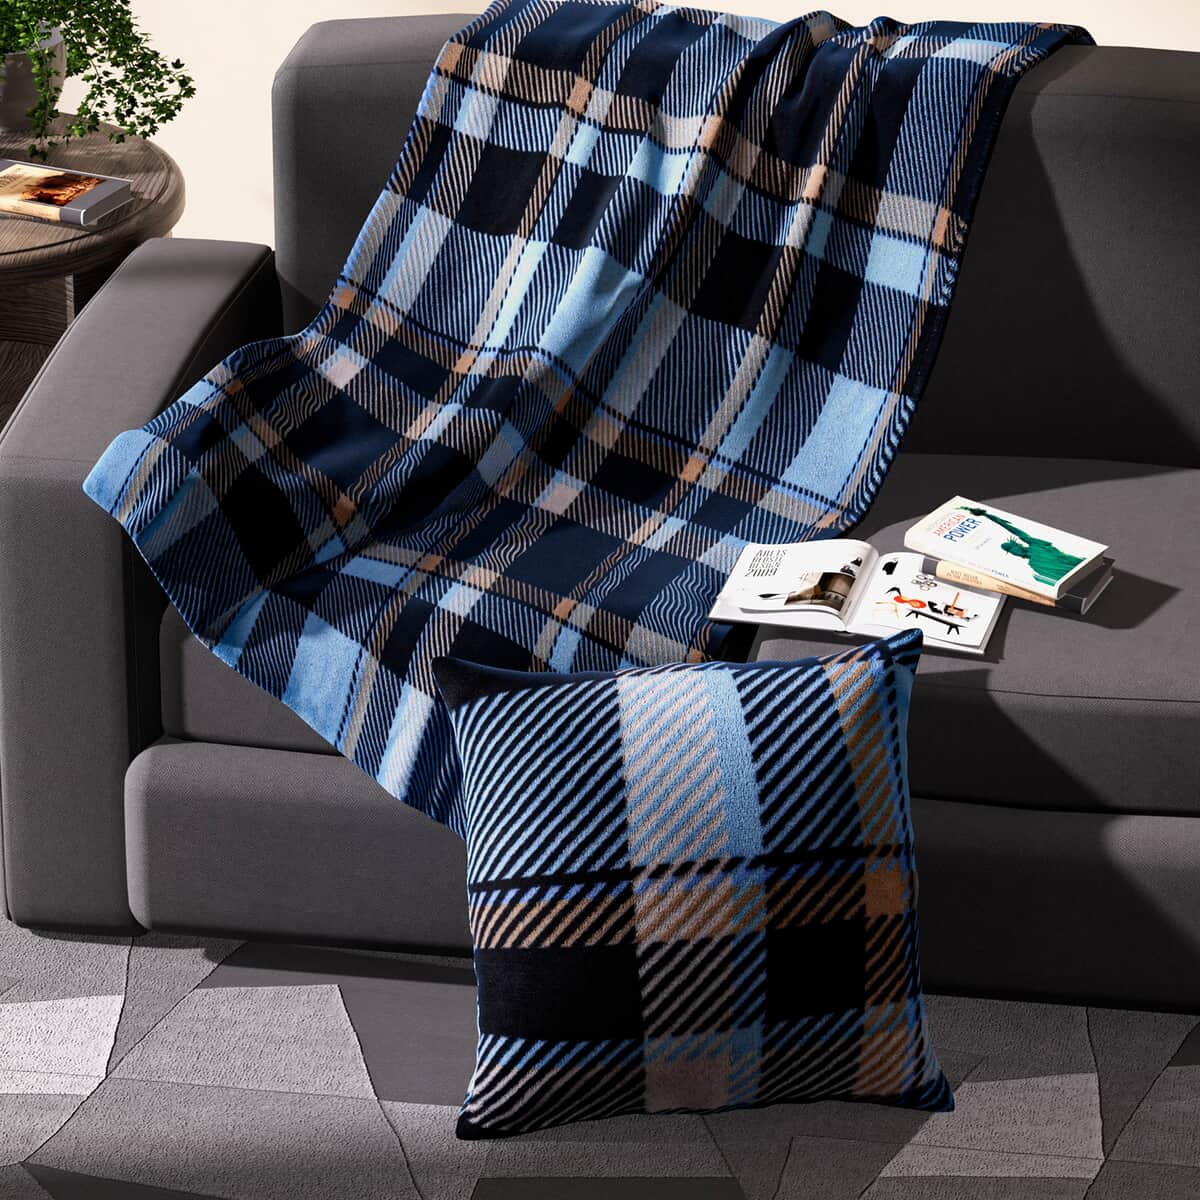 HOMESMART 2 in 1 Blue and Black Plaid Pattern Printed Flannel Blanket (50"x60") Folded into Cushion Cover (14.5"x14.5") image number 3